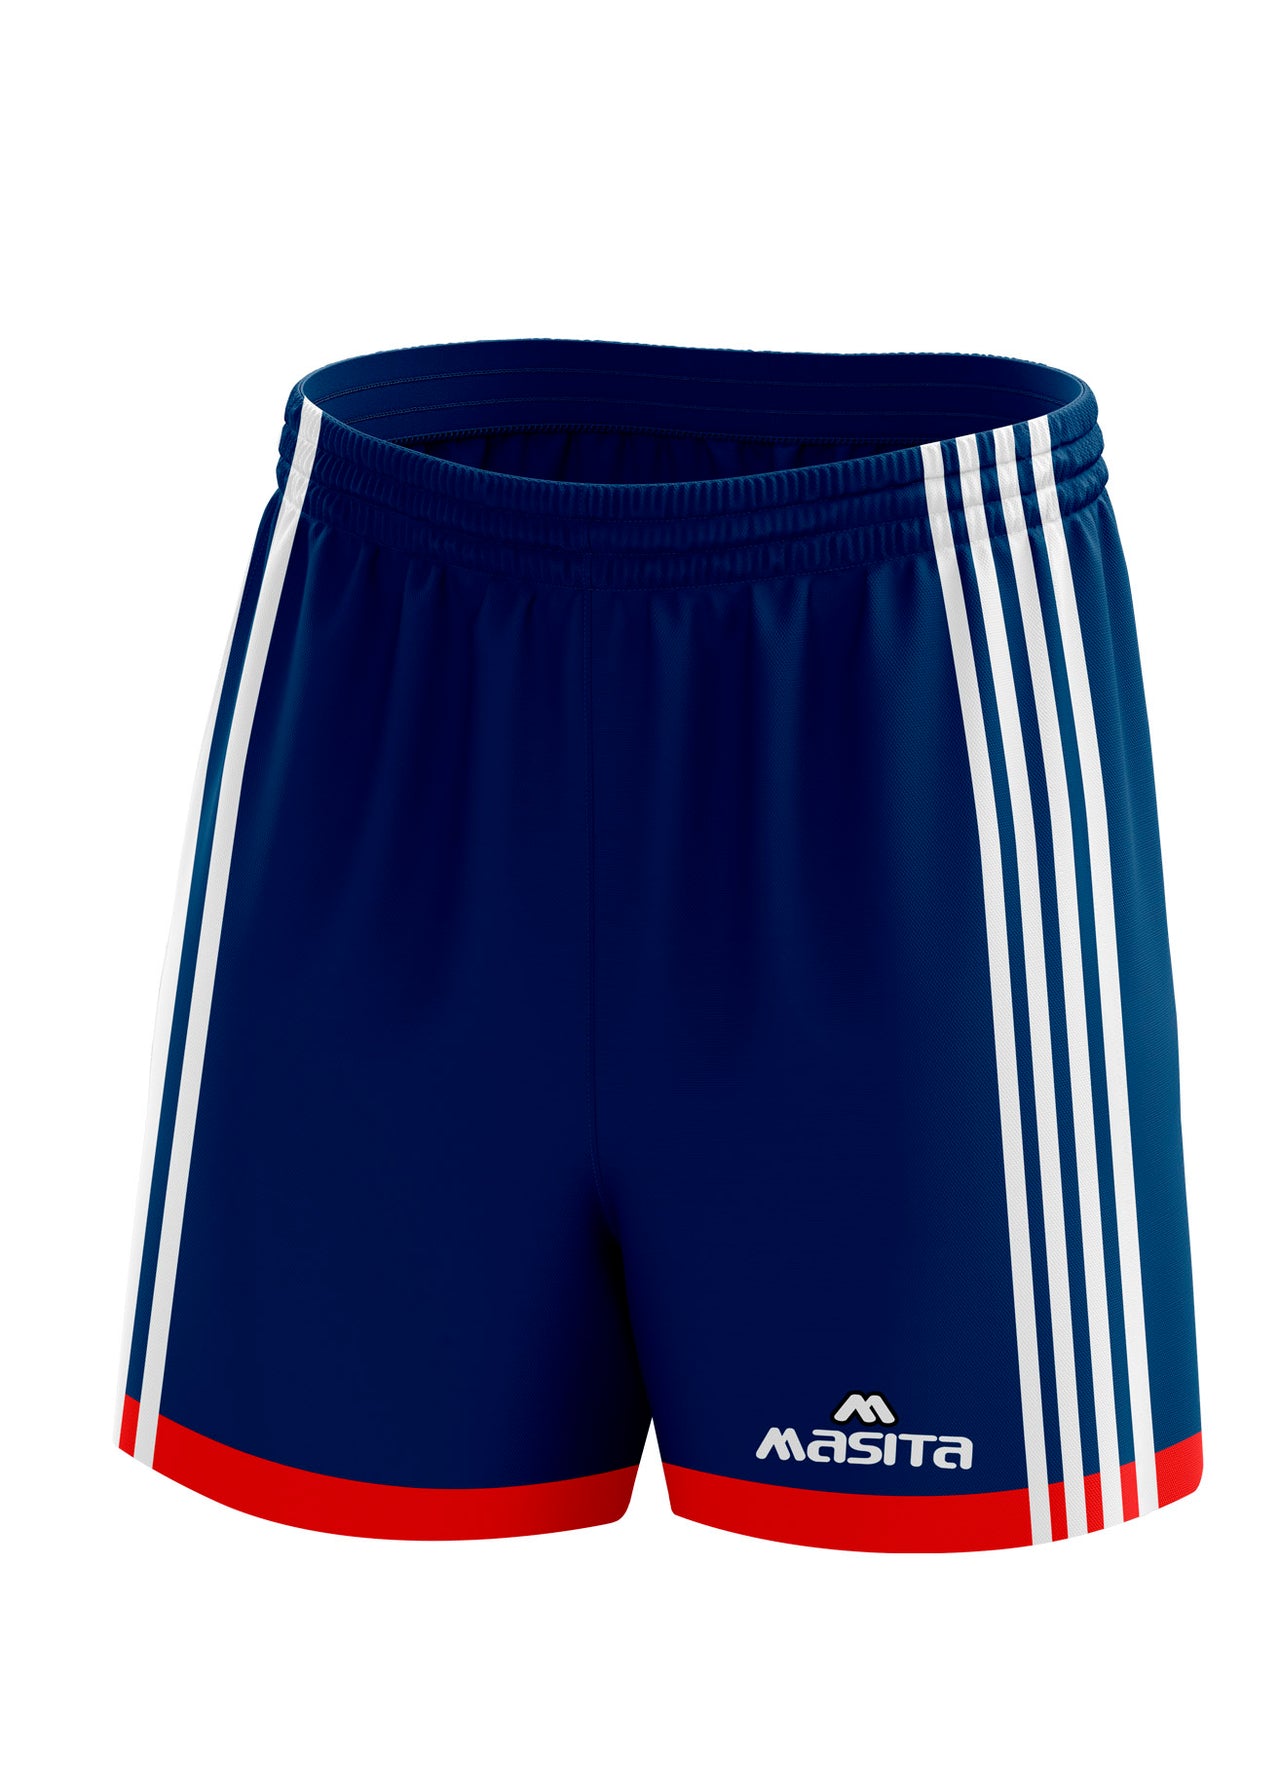 Solo Gaelic Shorts Navy/Red/White Adult